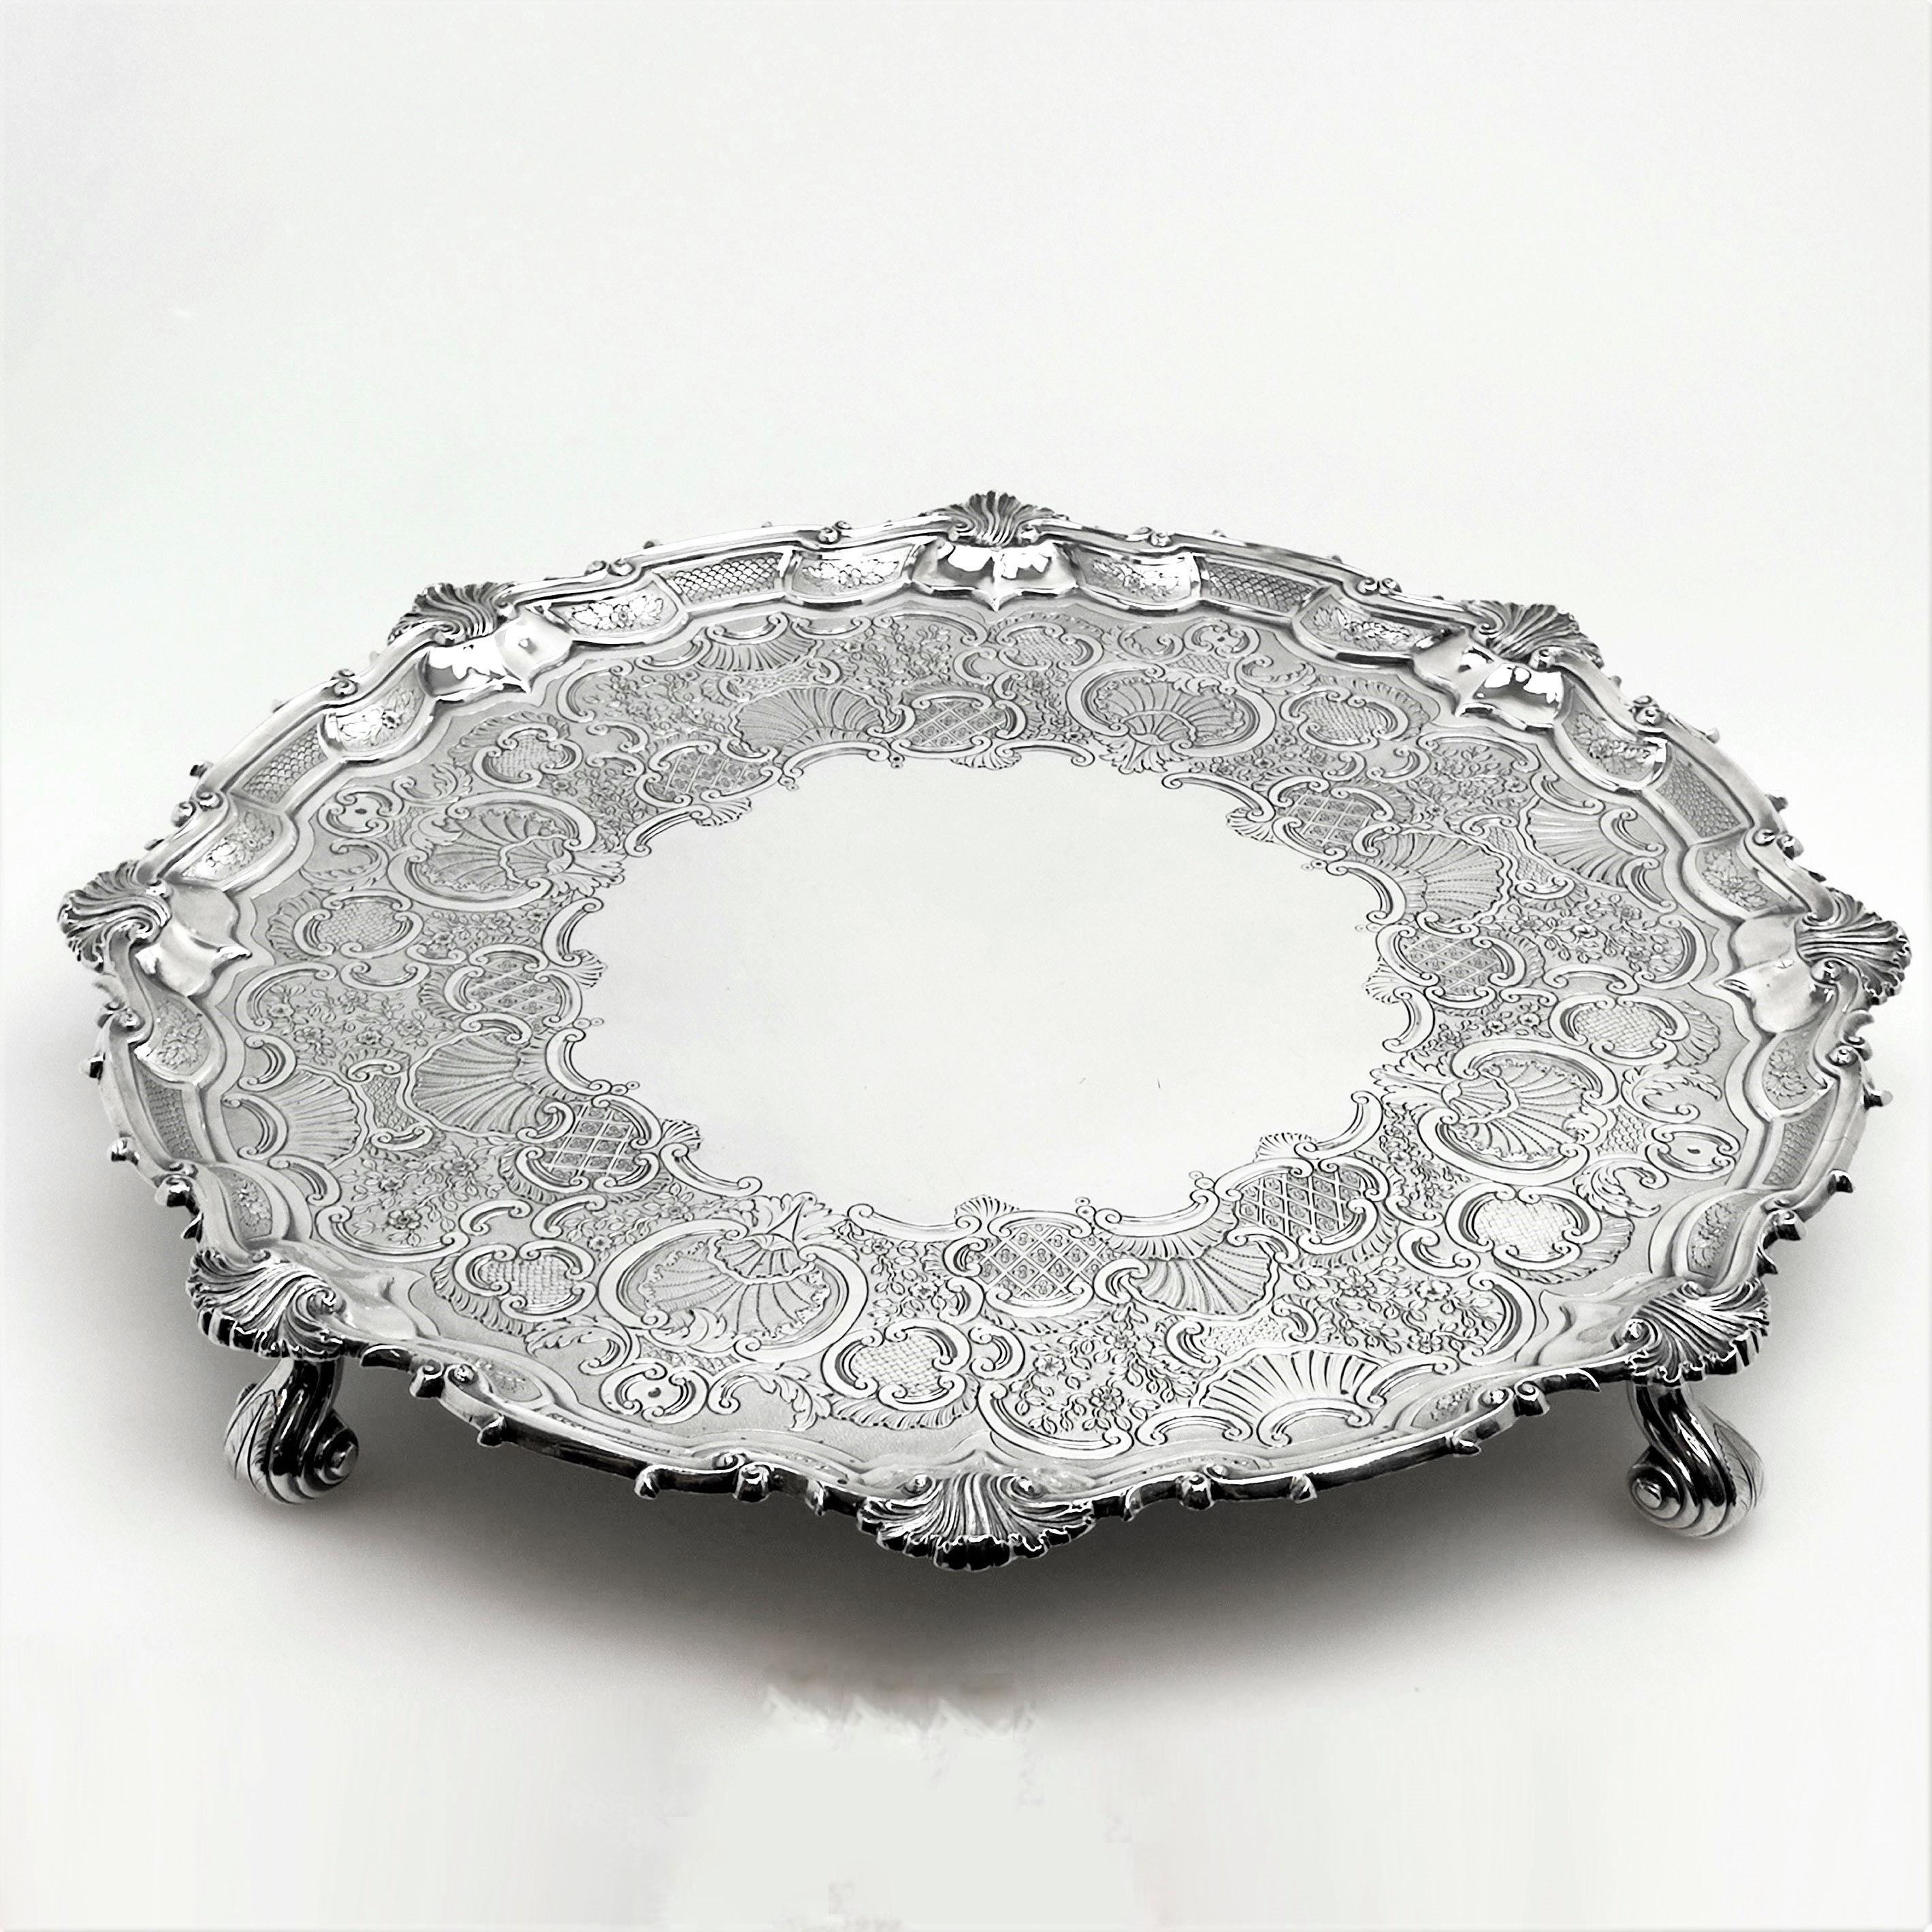 An enormous antique Georgian solid Silver Salver standing on four impressive scroll feet. The Salver has a shaped border and the Salver is embellished with an ornate shallow chased and engraved design around a central cartouche. 
 
 Made in London